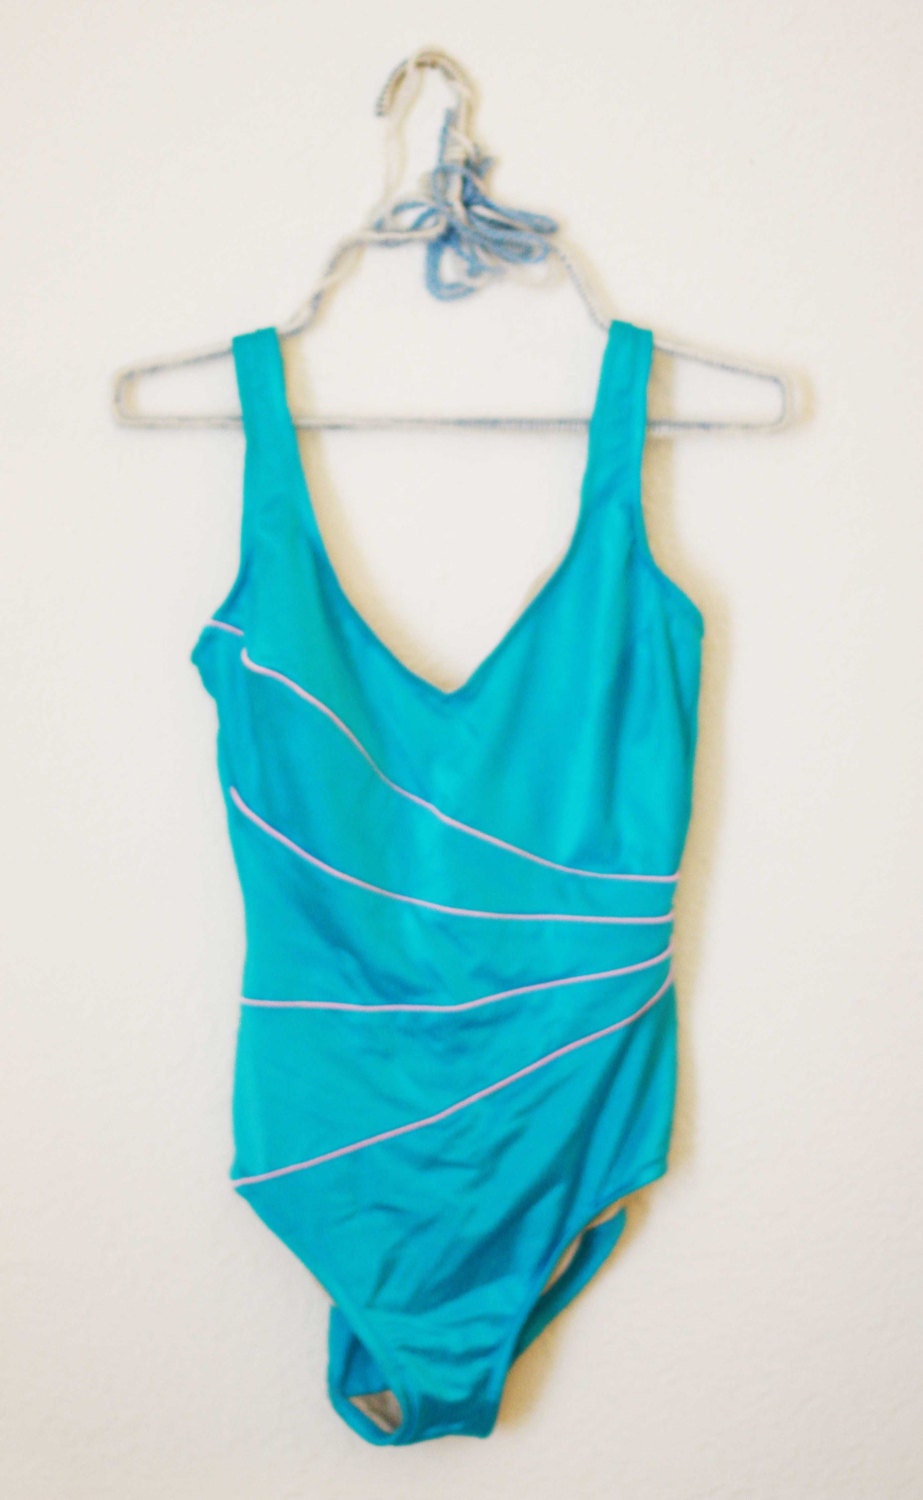 Vintage 1990s Small one piece swimsuit by elizamoonbeamvintage